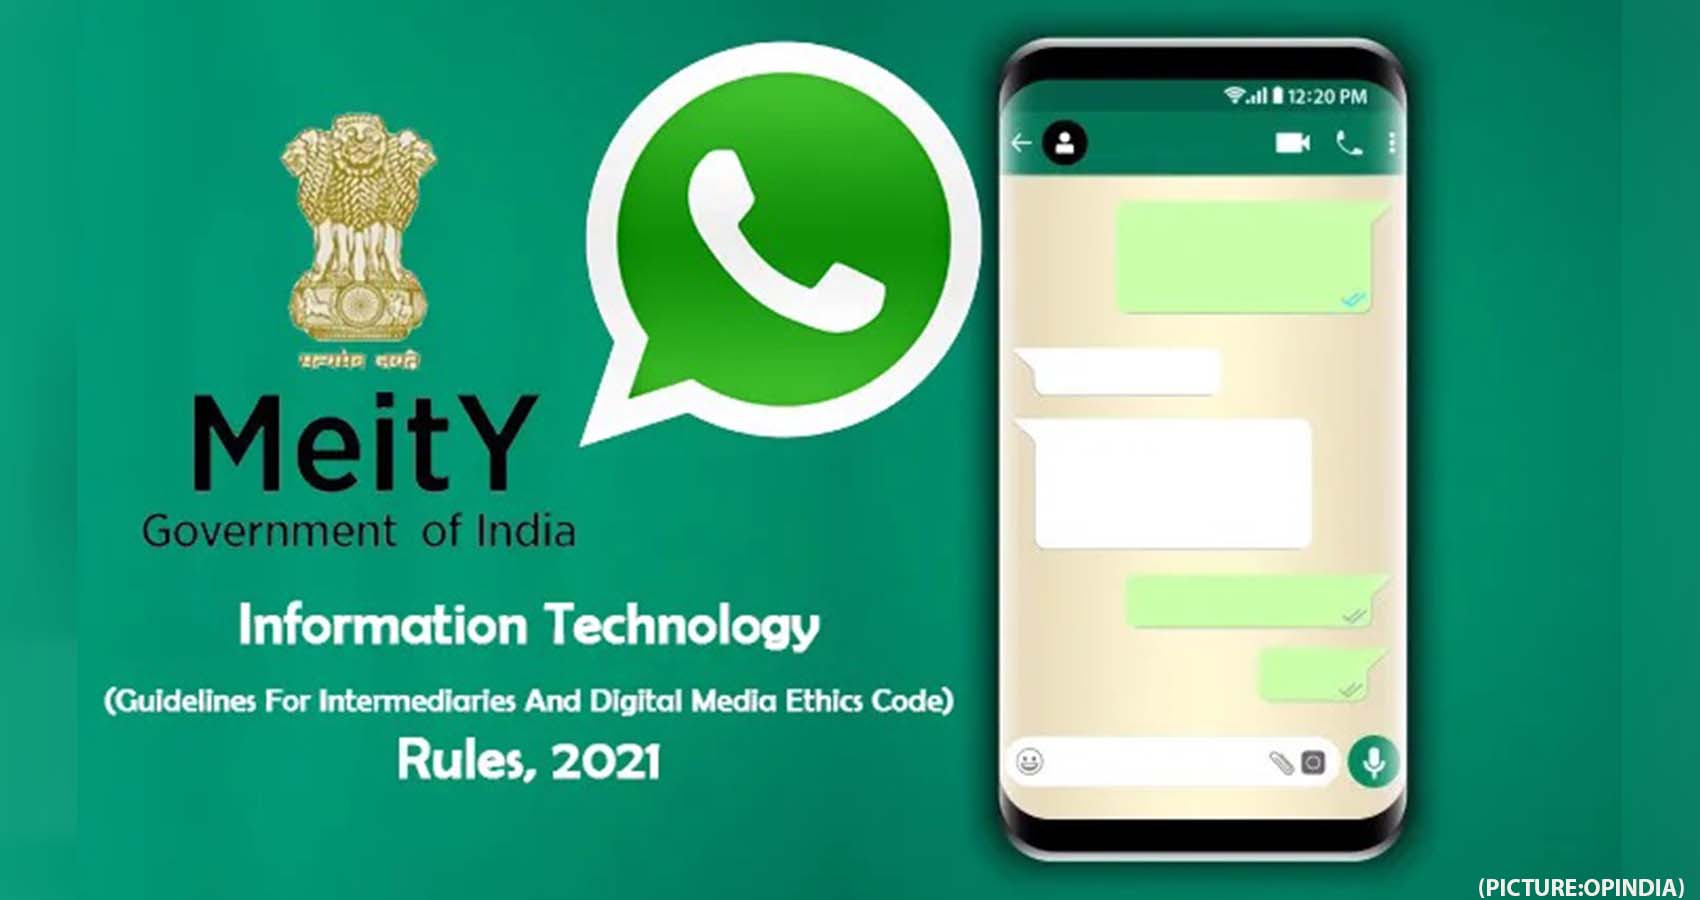 Whatsapp CEO Says, India’s New IT Guidelines Are Regressive